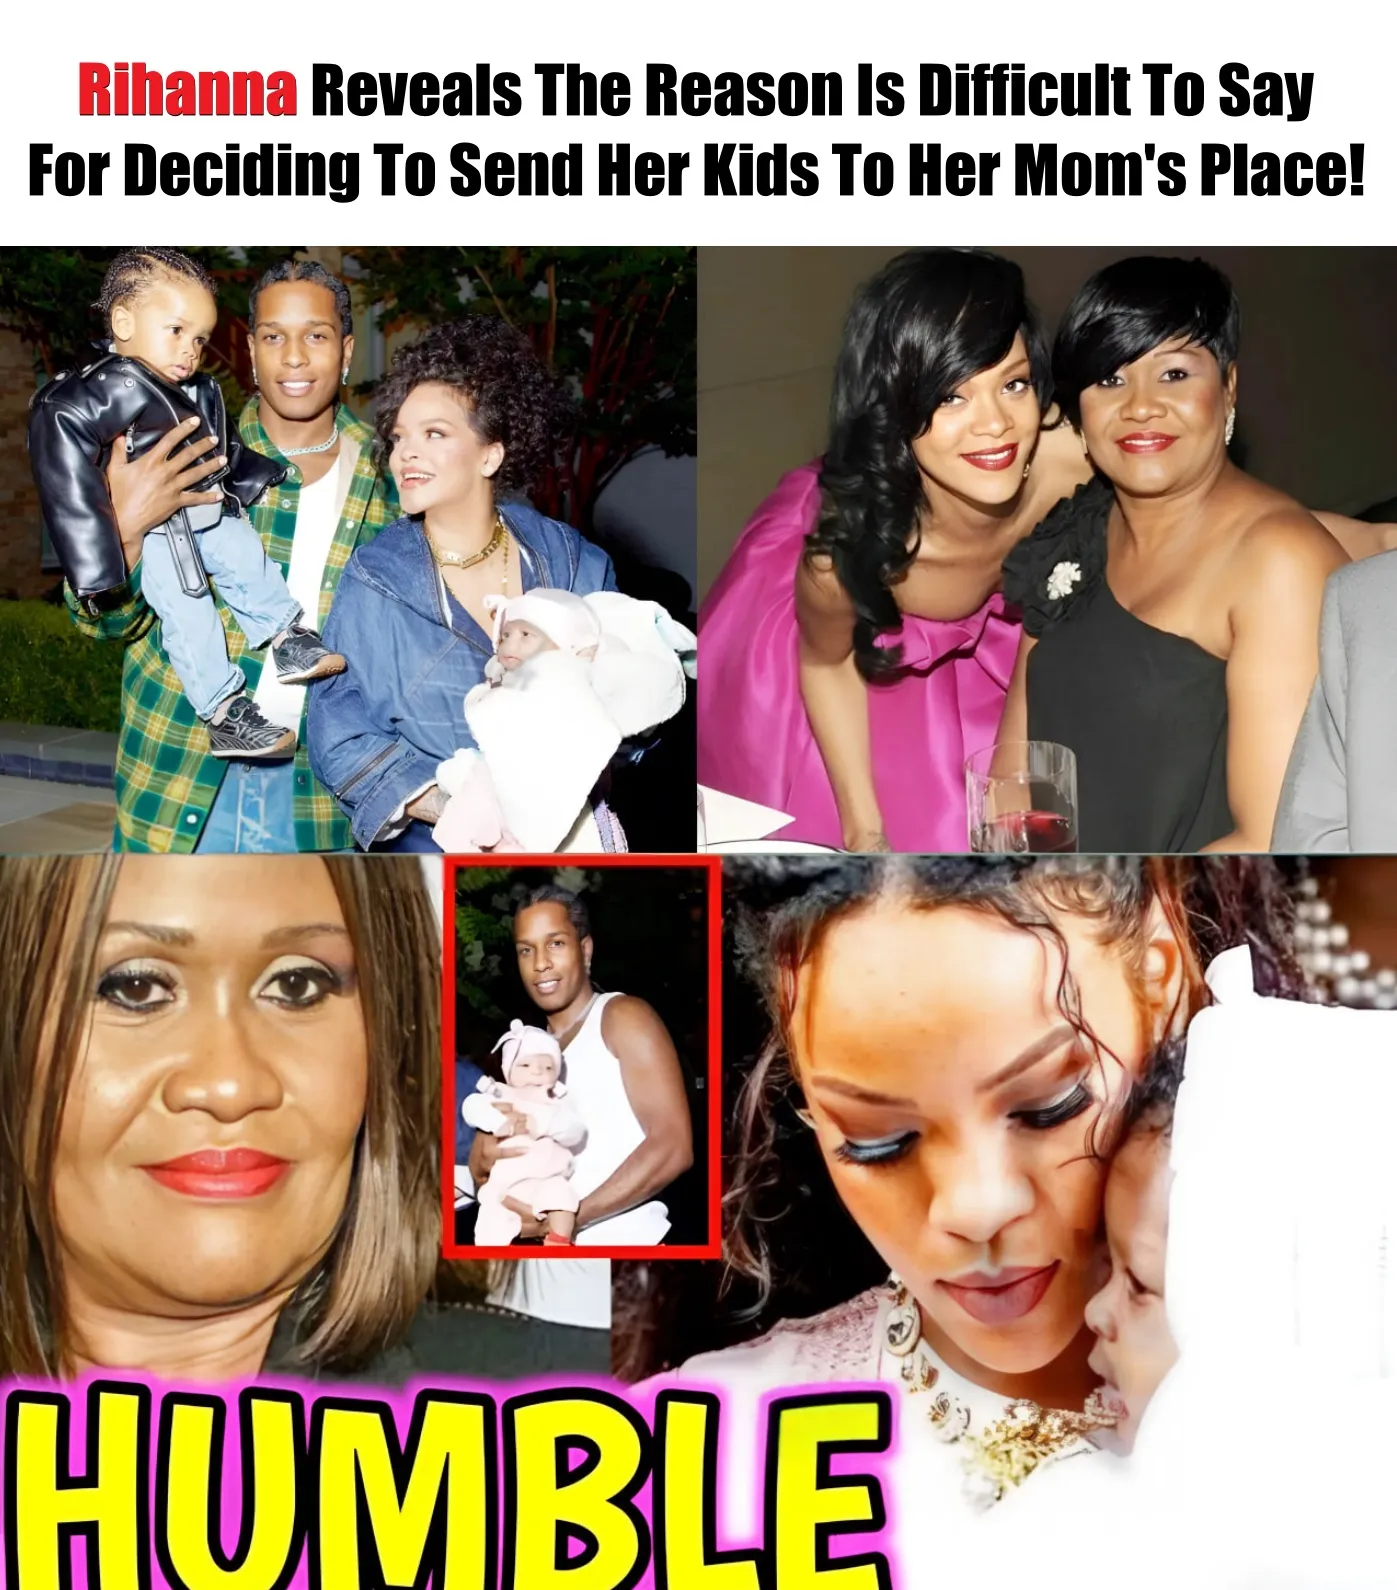 Cover Image for Rihanna Reveals The Reason Is Difficult To Say For Deciding To Send Her Kids To Her Mom’s Place!